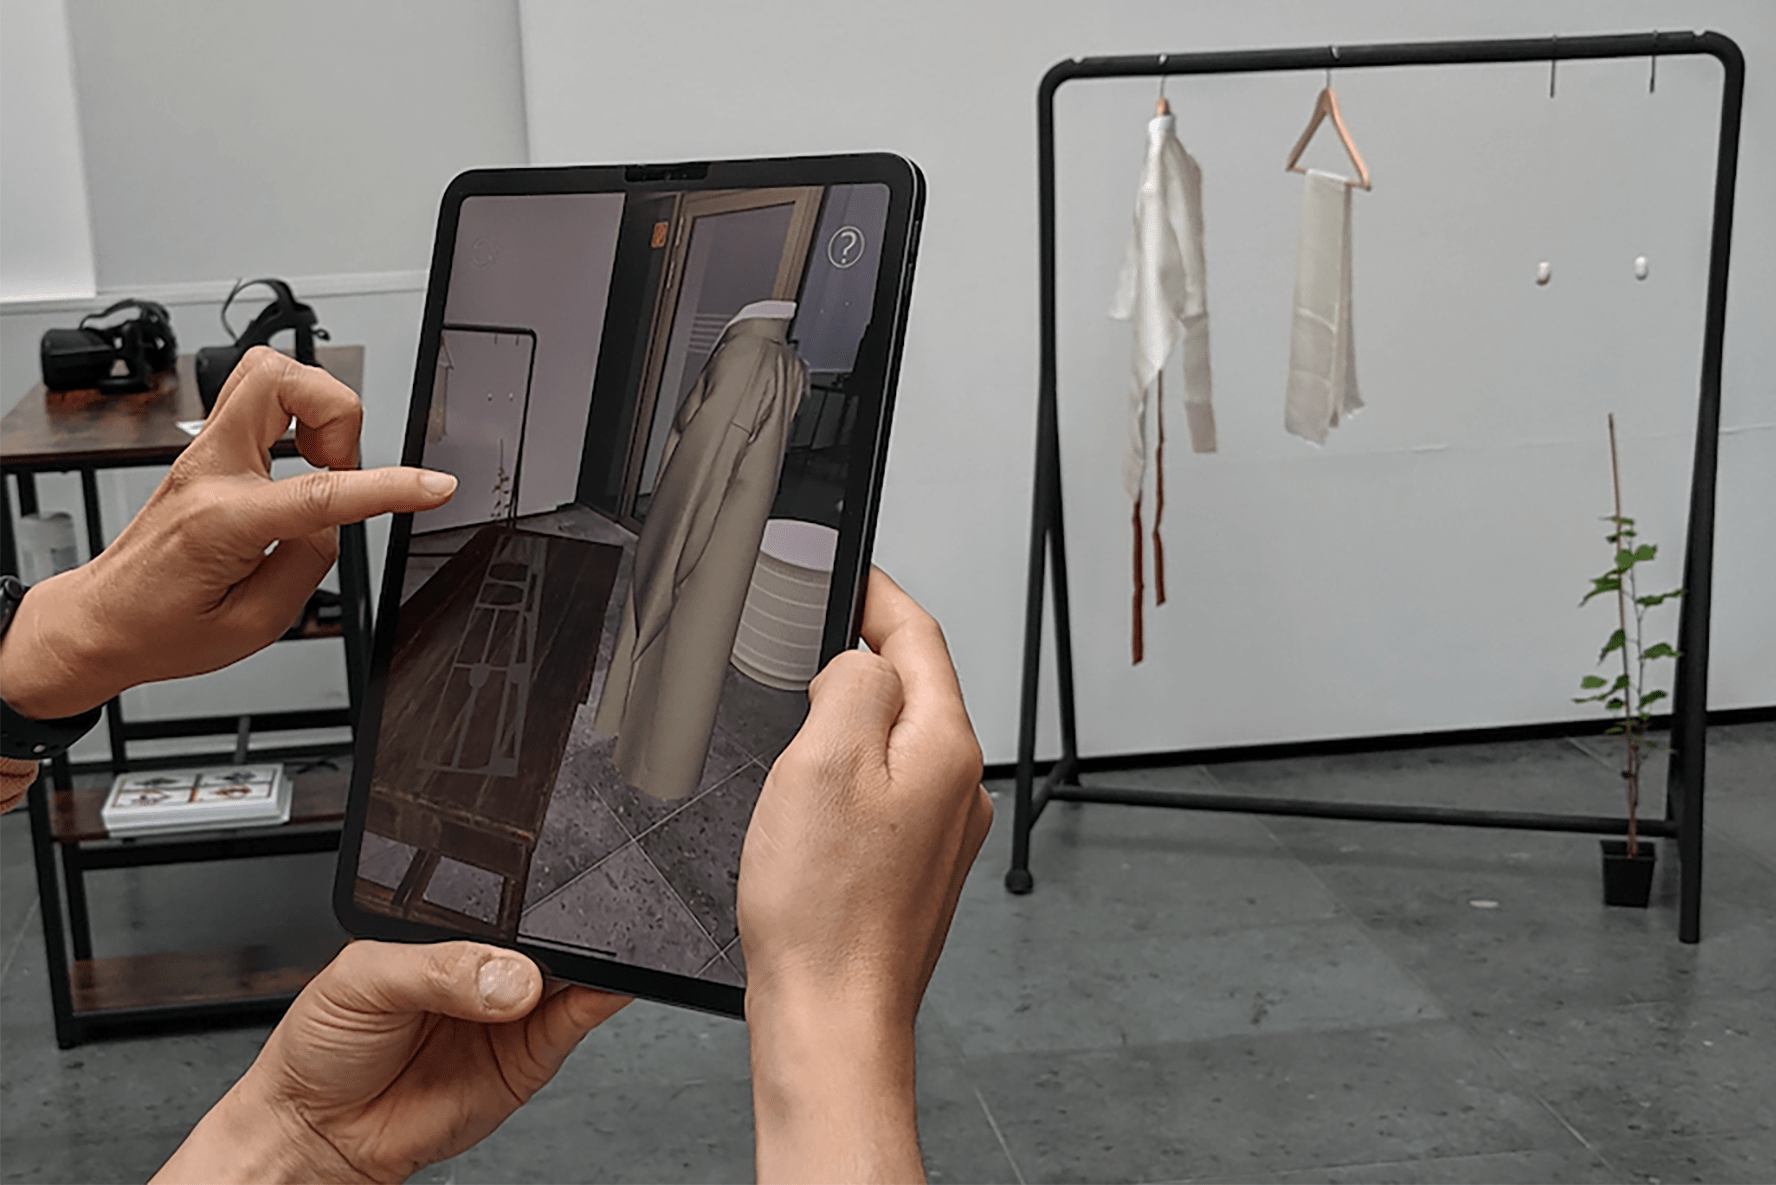 2021, augmented reality experience. Researchers: Yoonha Kim and Julien Letellier, »Matters of Activity«, HU Berlin. Developers: Julien Letellier, Michael Droste, and Catherine Heyart.